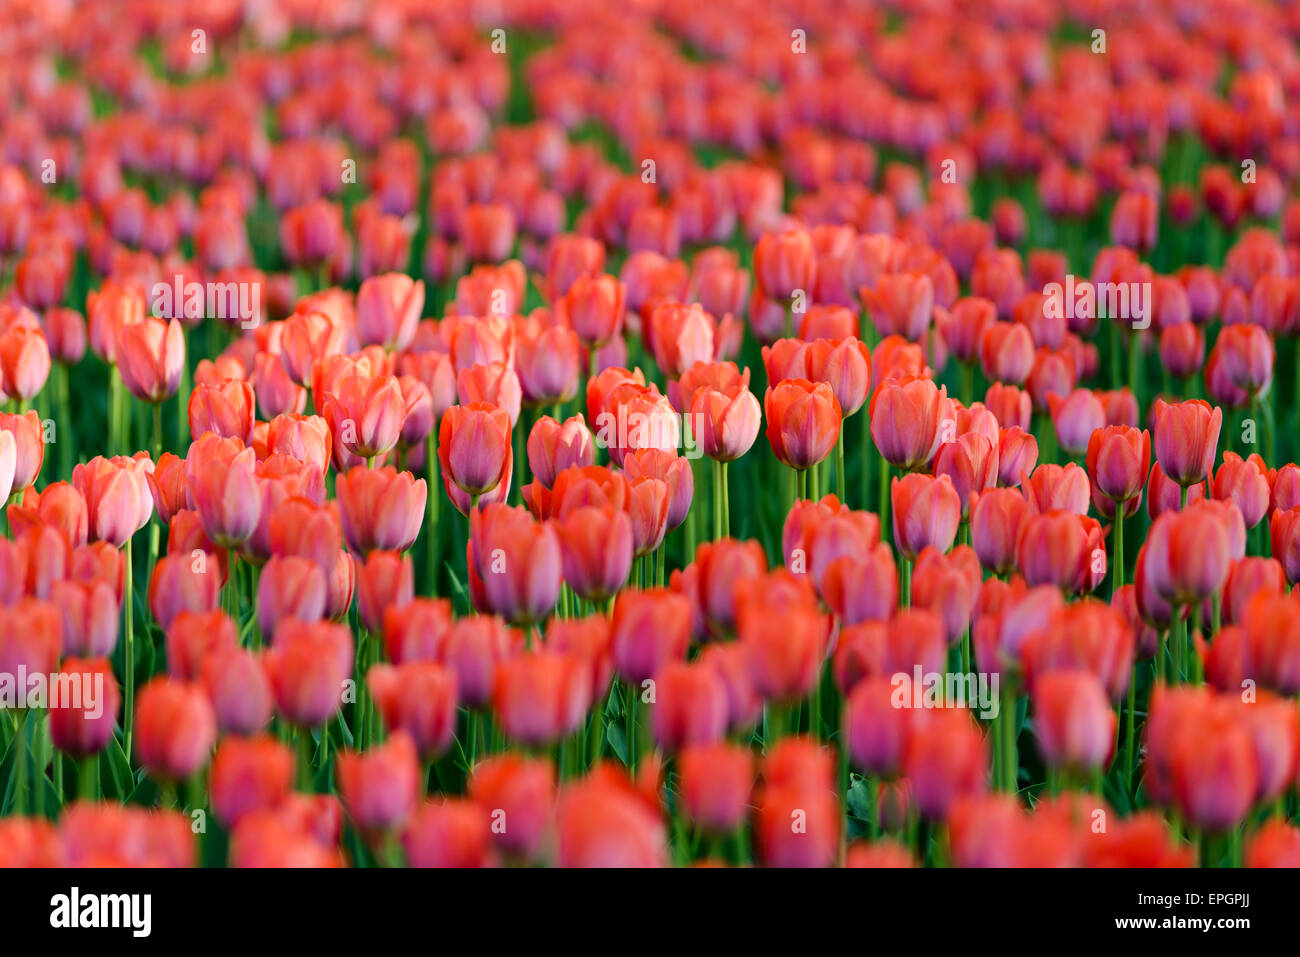 Flowers: red tulips in the garden, blurred background Stock Photo